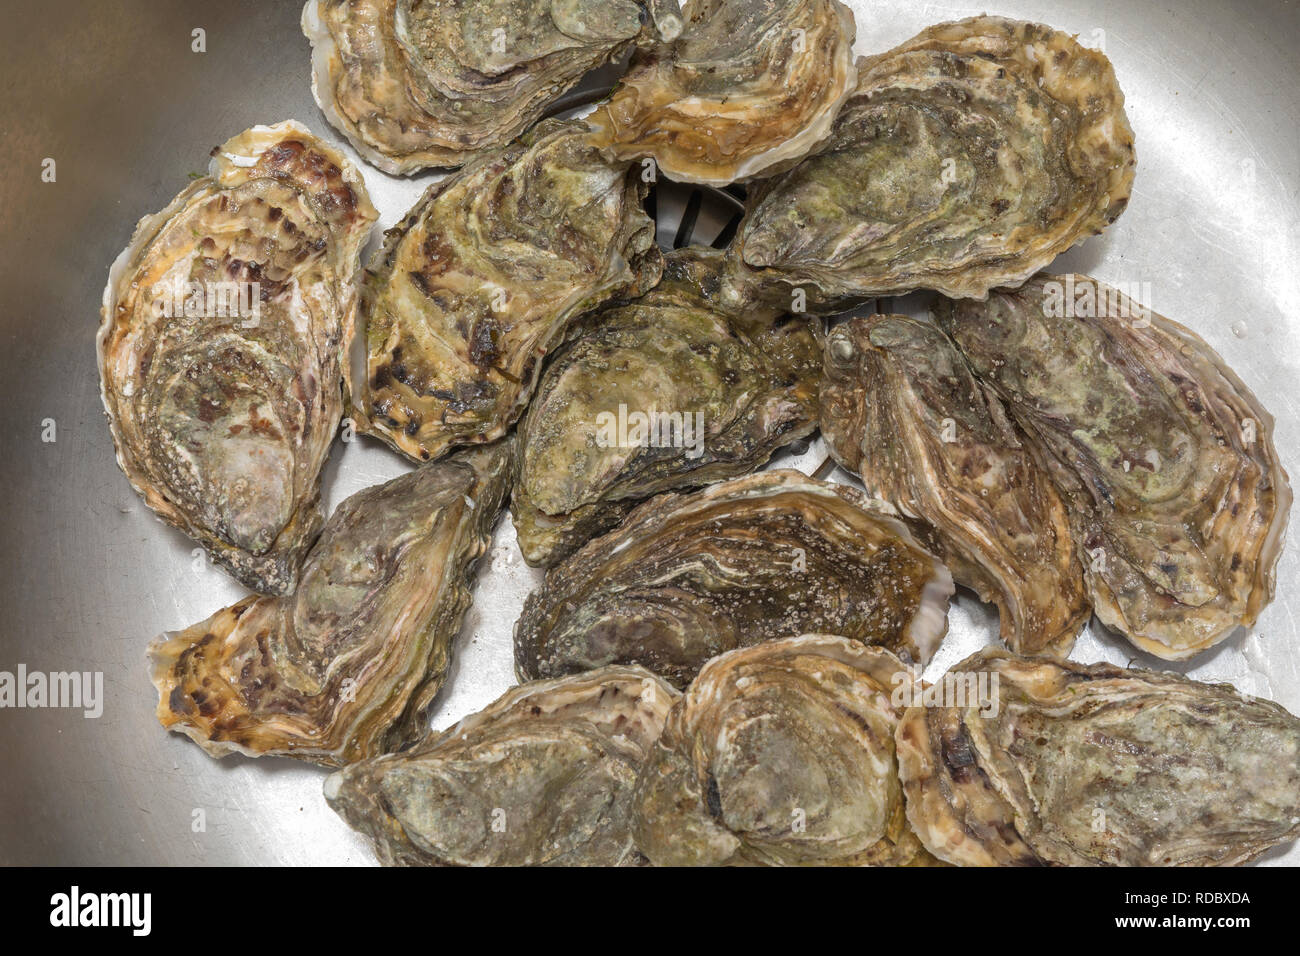 Big Bunch of Fresh Oysters Seafood Stock Photo